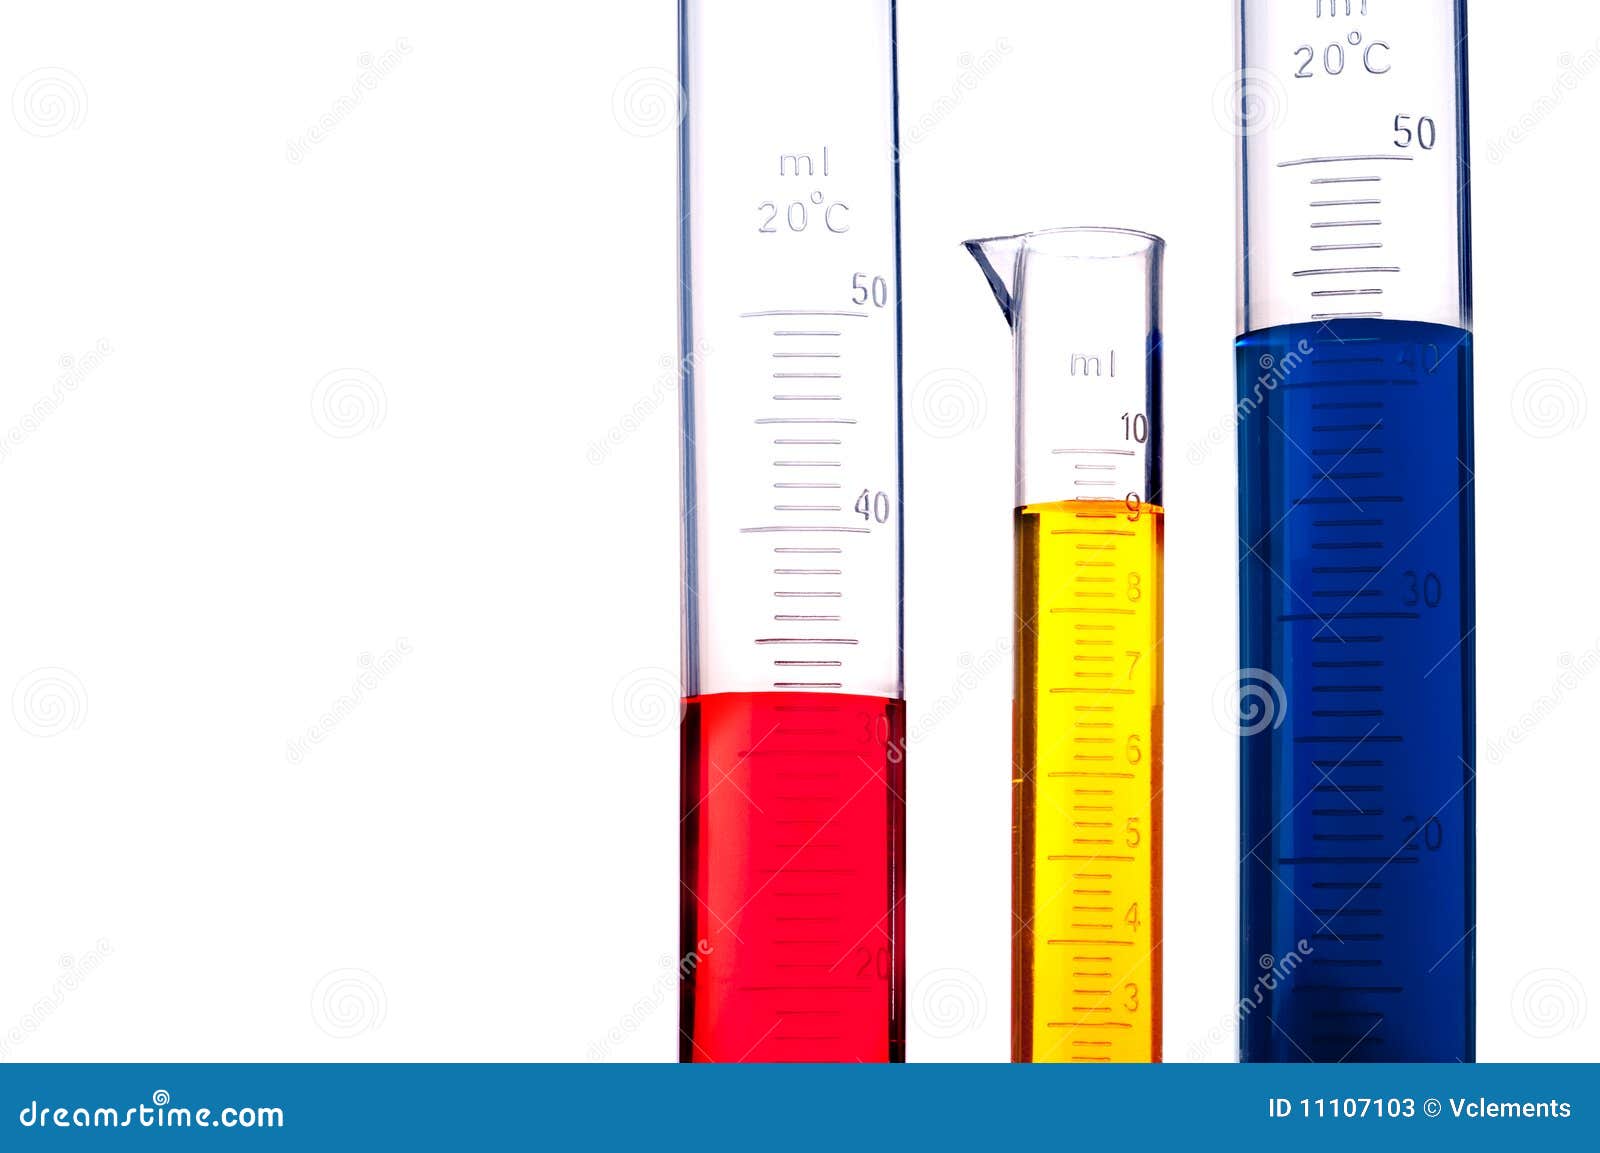 graduated cylinders of colored chemicals